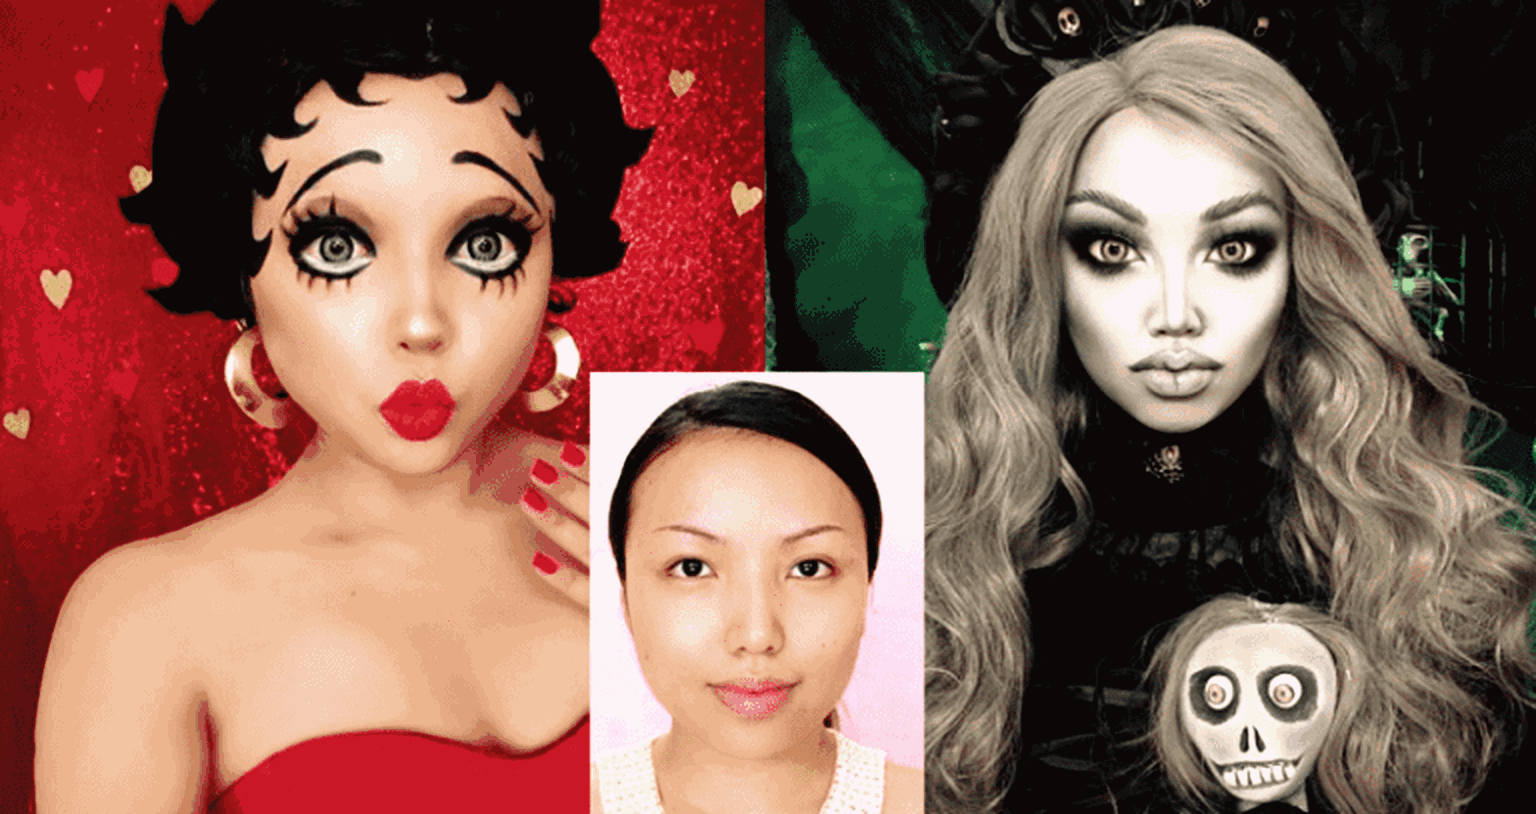 Makeup Artist Can Turn Herself Into Any Character or Celebrity